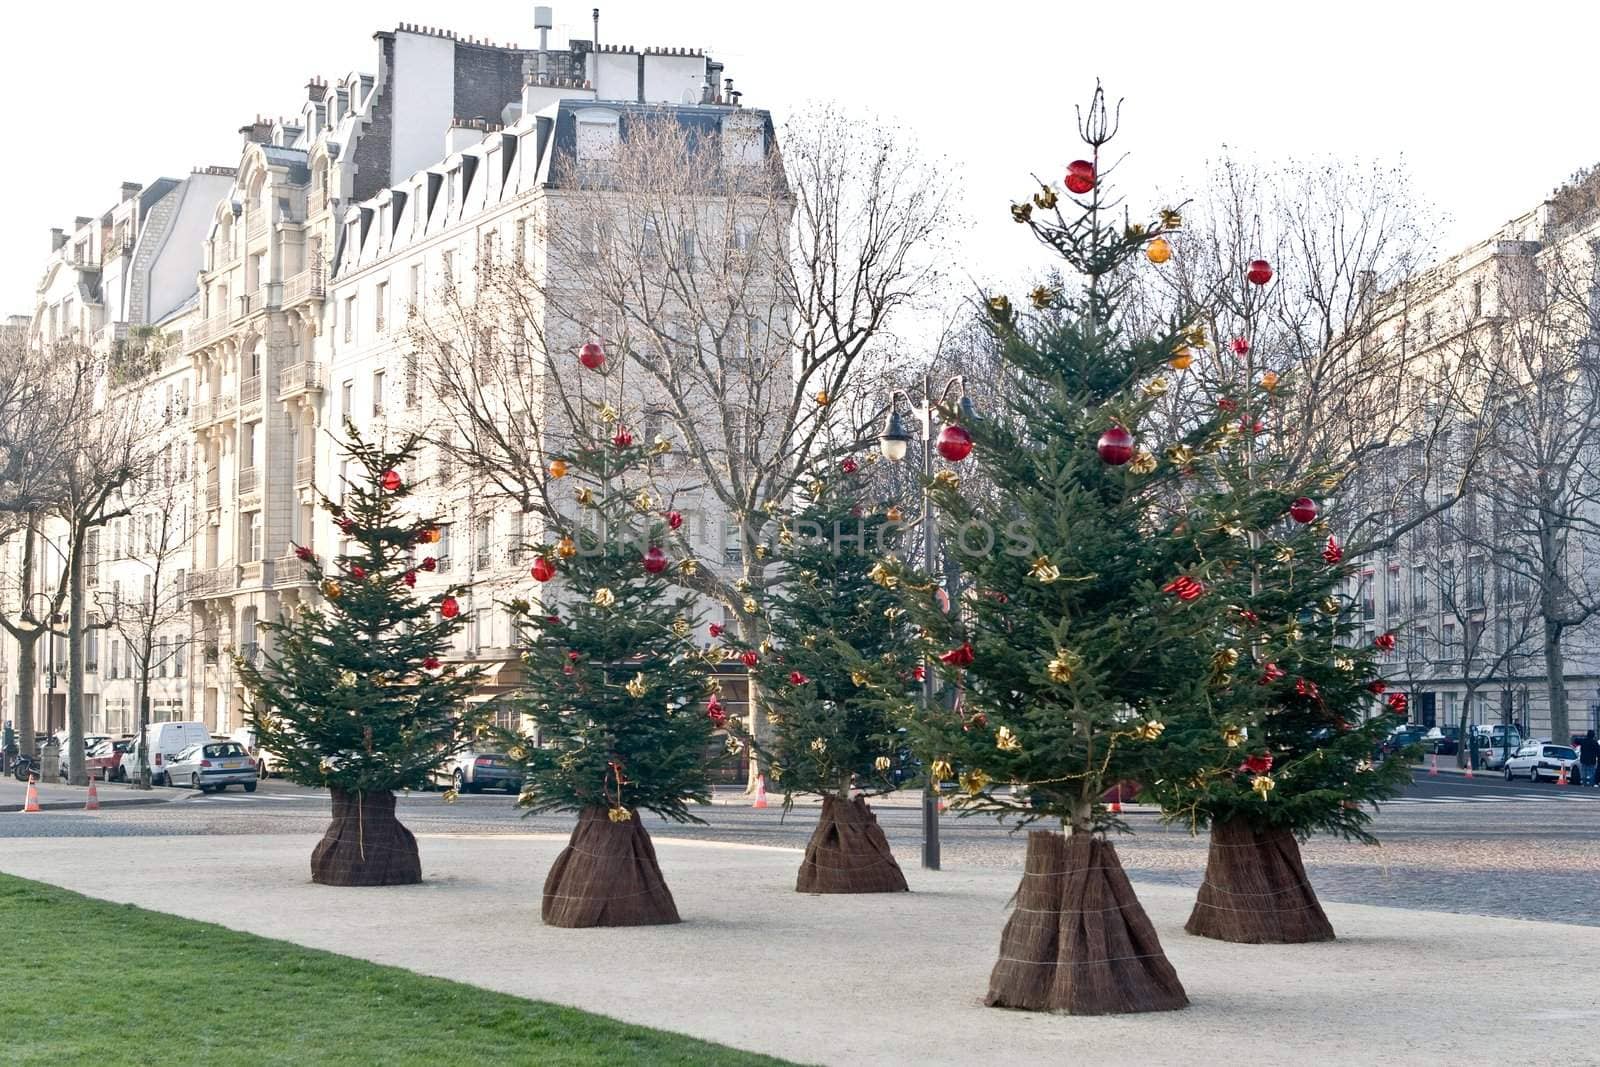 Streets of Paris before Christmas